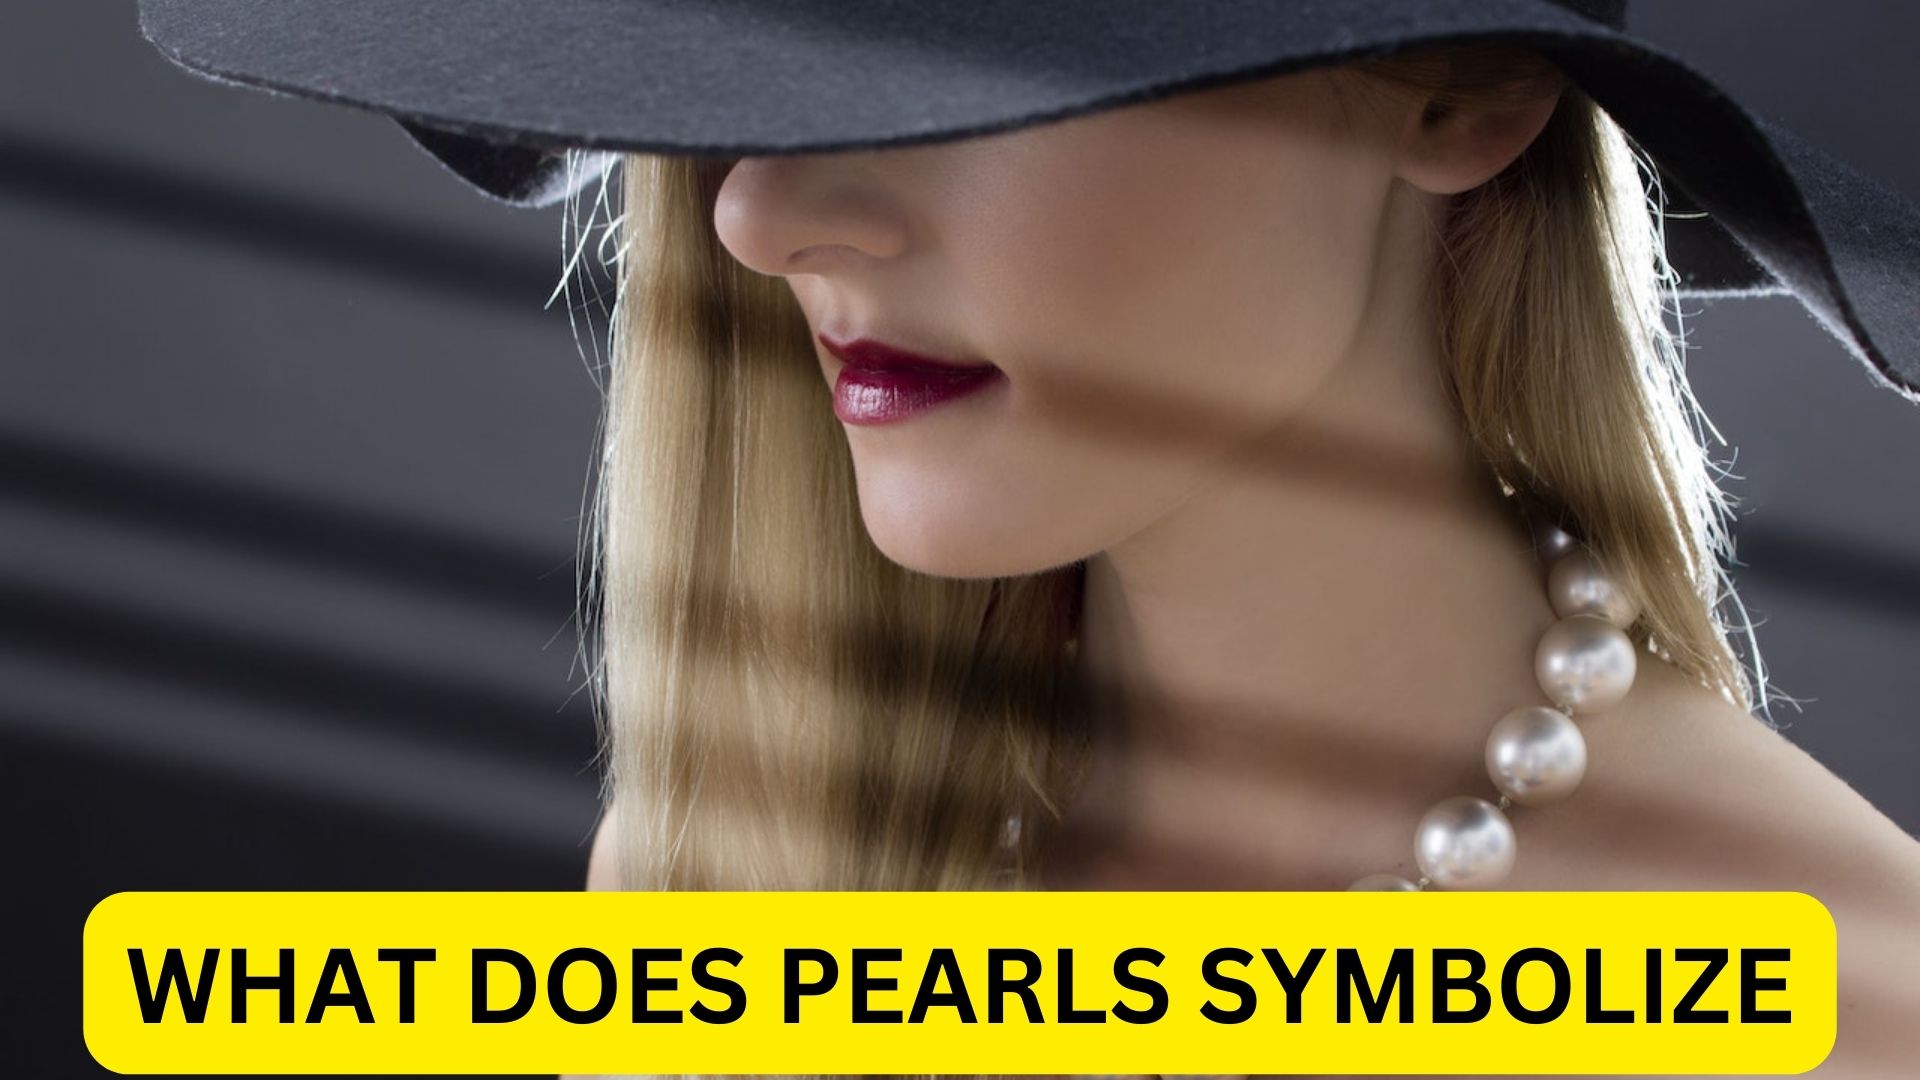 What Does Pearls Symbolize?